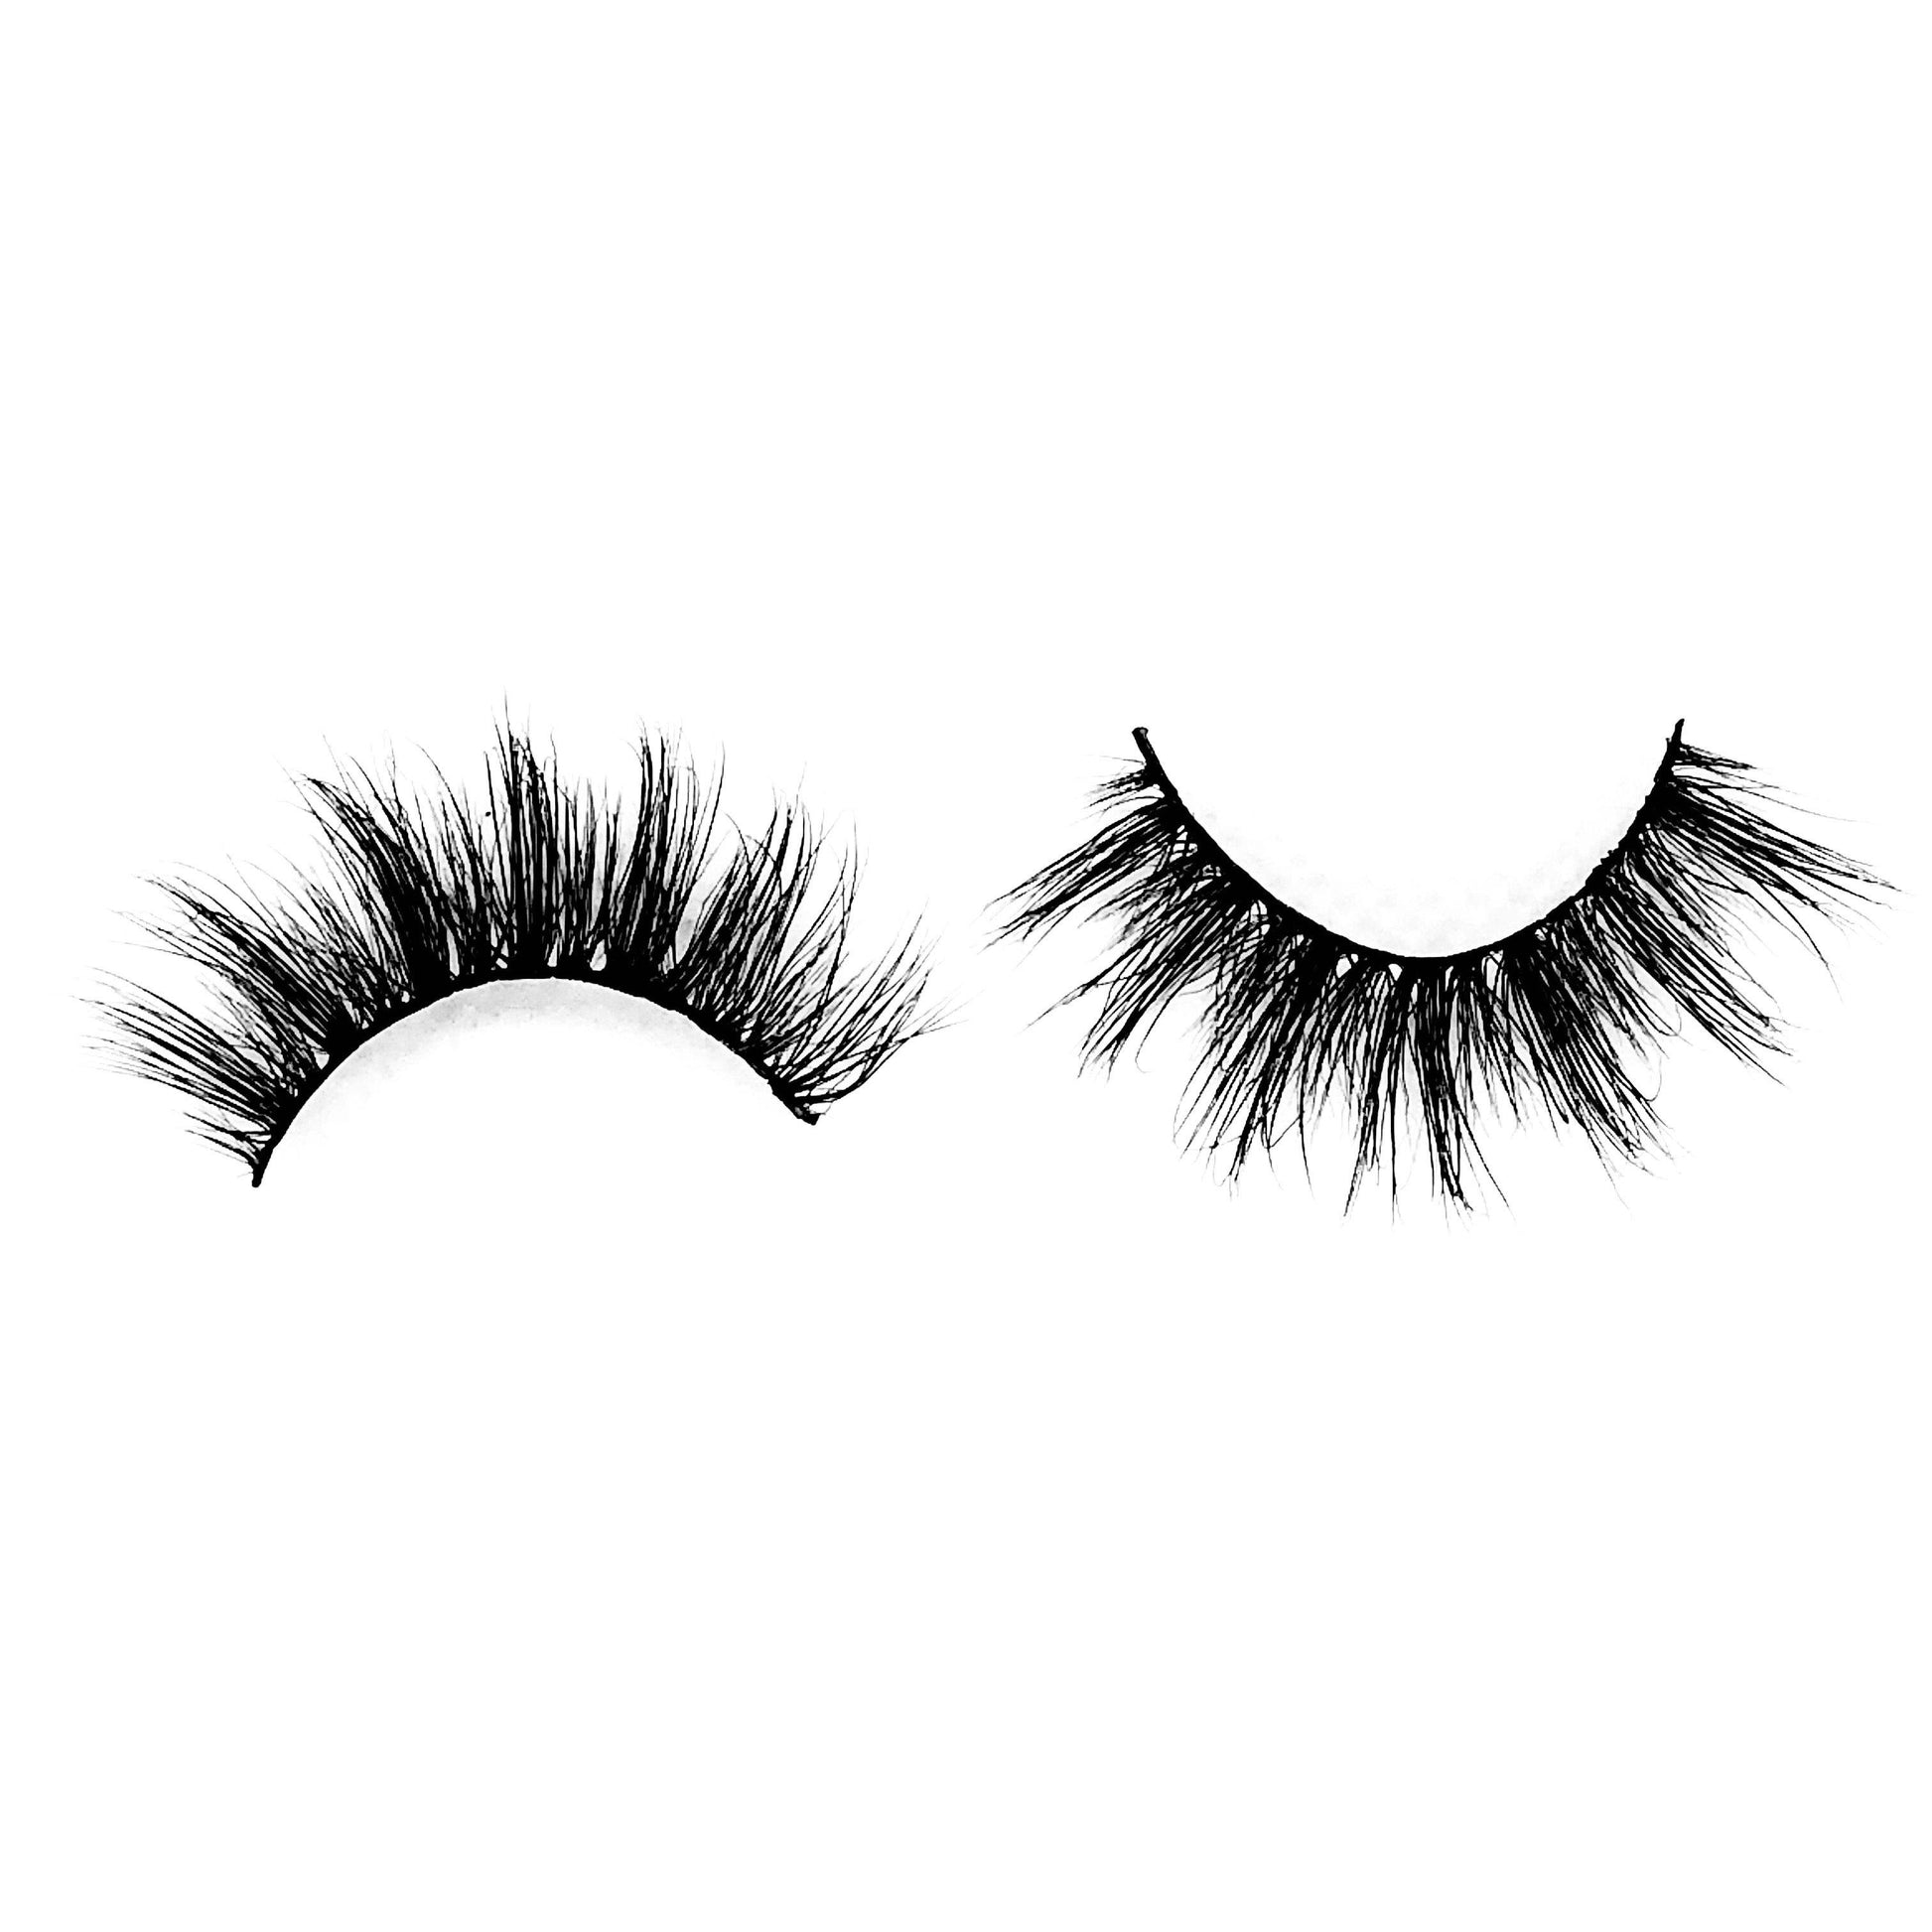 London-Medium Volume-Fun, flirty, and casual 3D Mink lashes. “London” is a super cute, wispy, natural pair of lashes! They’re essential for your everyday lash collection. The alternating lengths are perfect for giving you a doll eyed look. The perfect style for a girl on the go with/without glam. Also available in our "Wispy (3-Pack)" and "Best Sellers (3-Pack)." Description Handmade, Cruelty-Free, Wear up to 30x Material: 100% Mink Band: Black Cotton Band Volume: Medium Style: Wispy, Flirty, Do